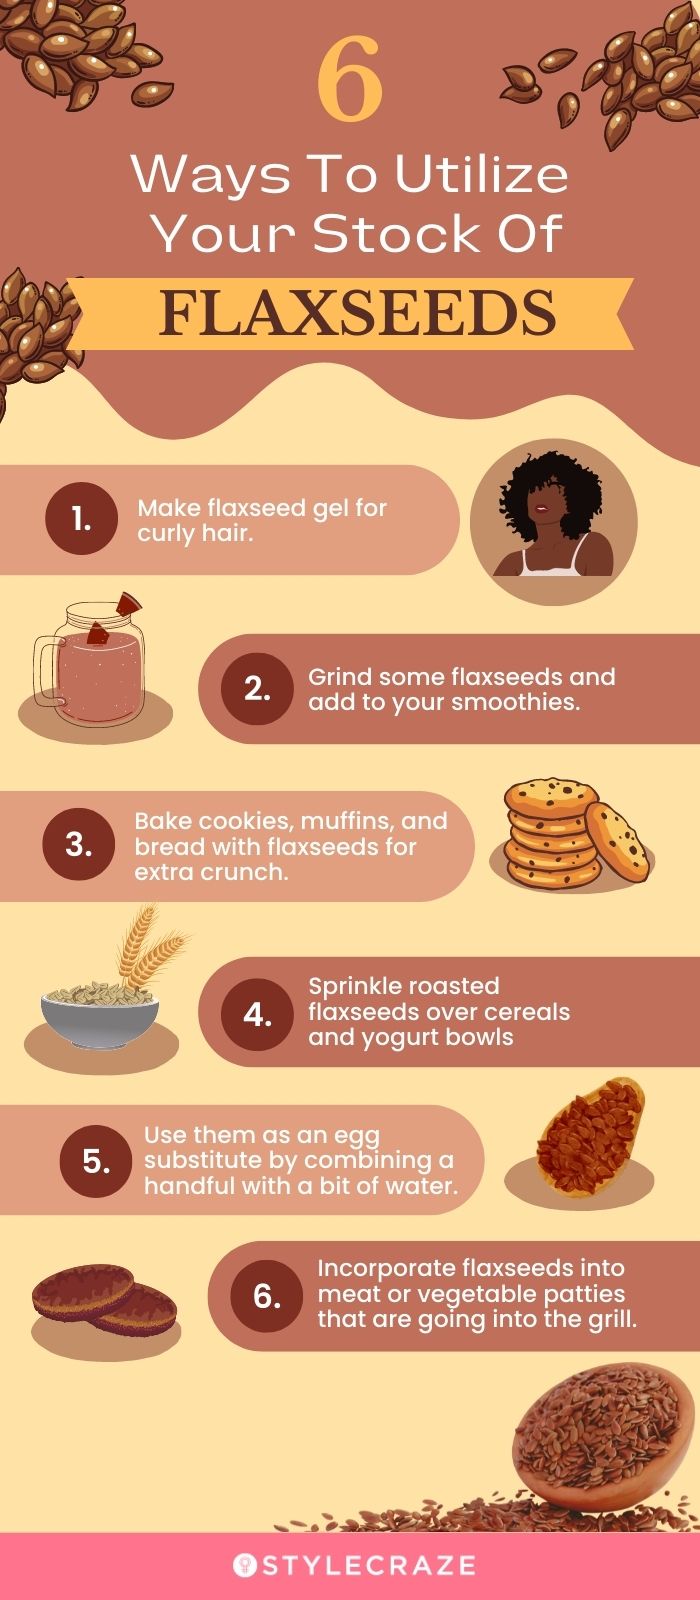 6 ways to utilize your stock of flaxseeds [infographic]